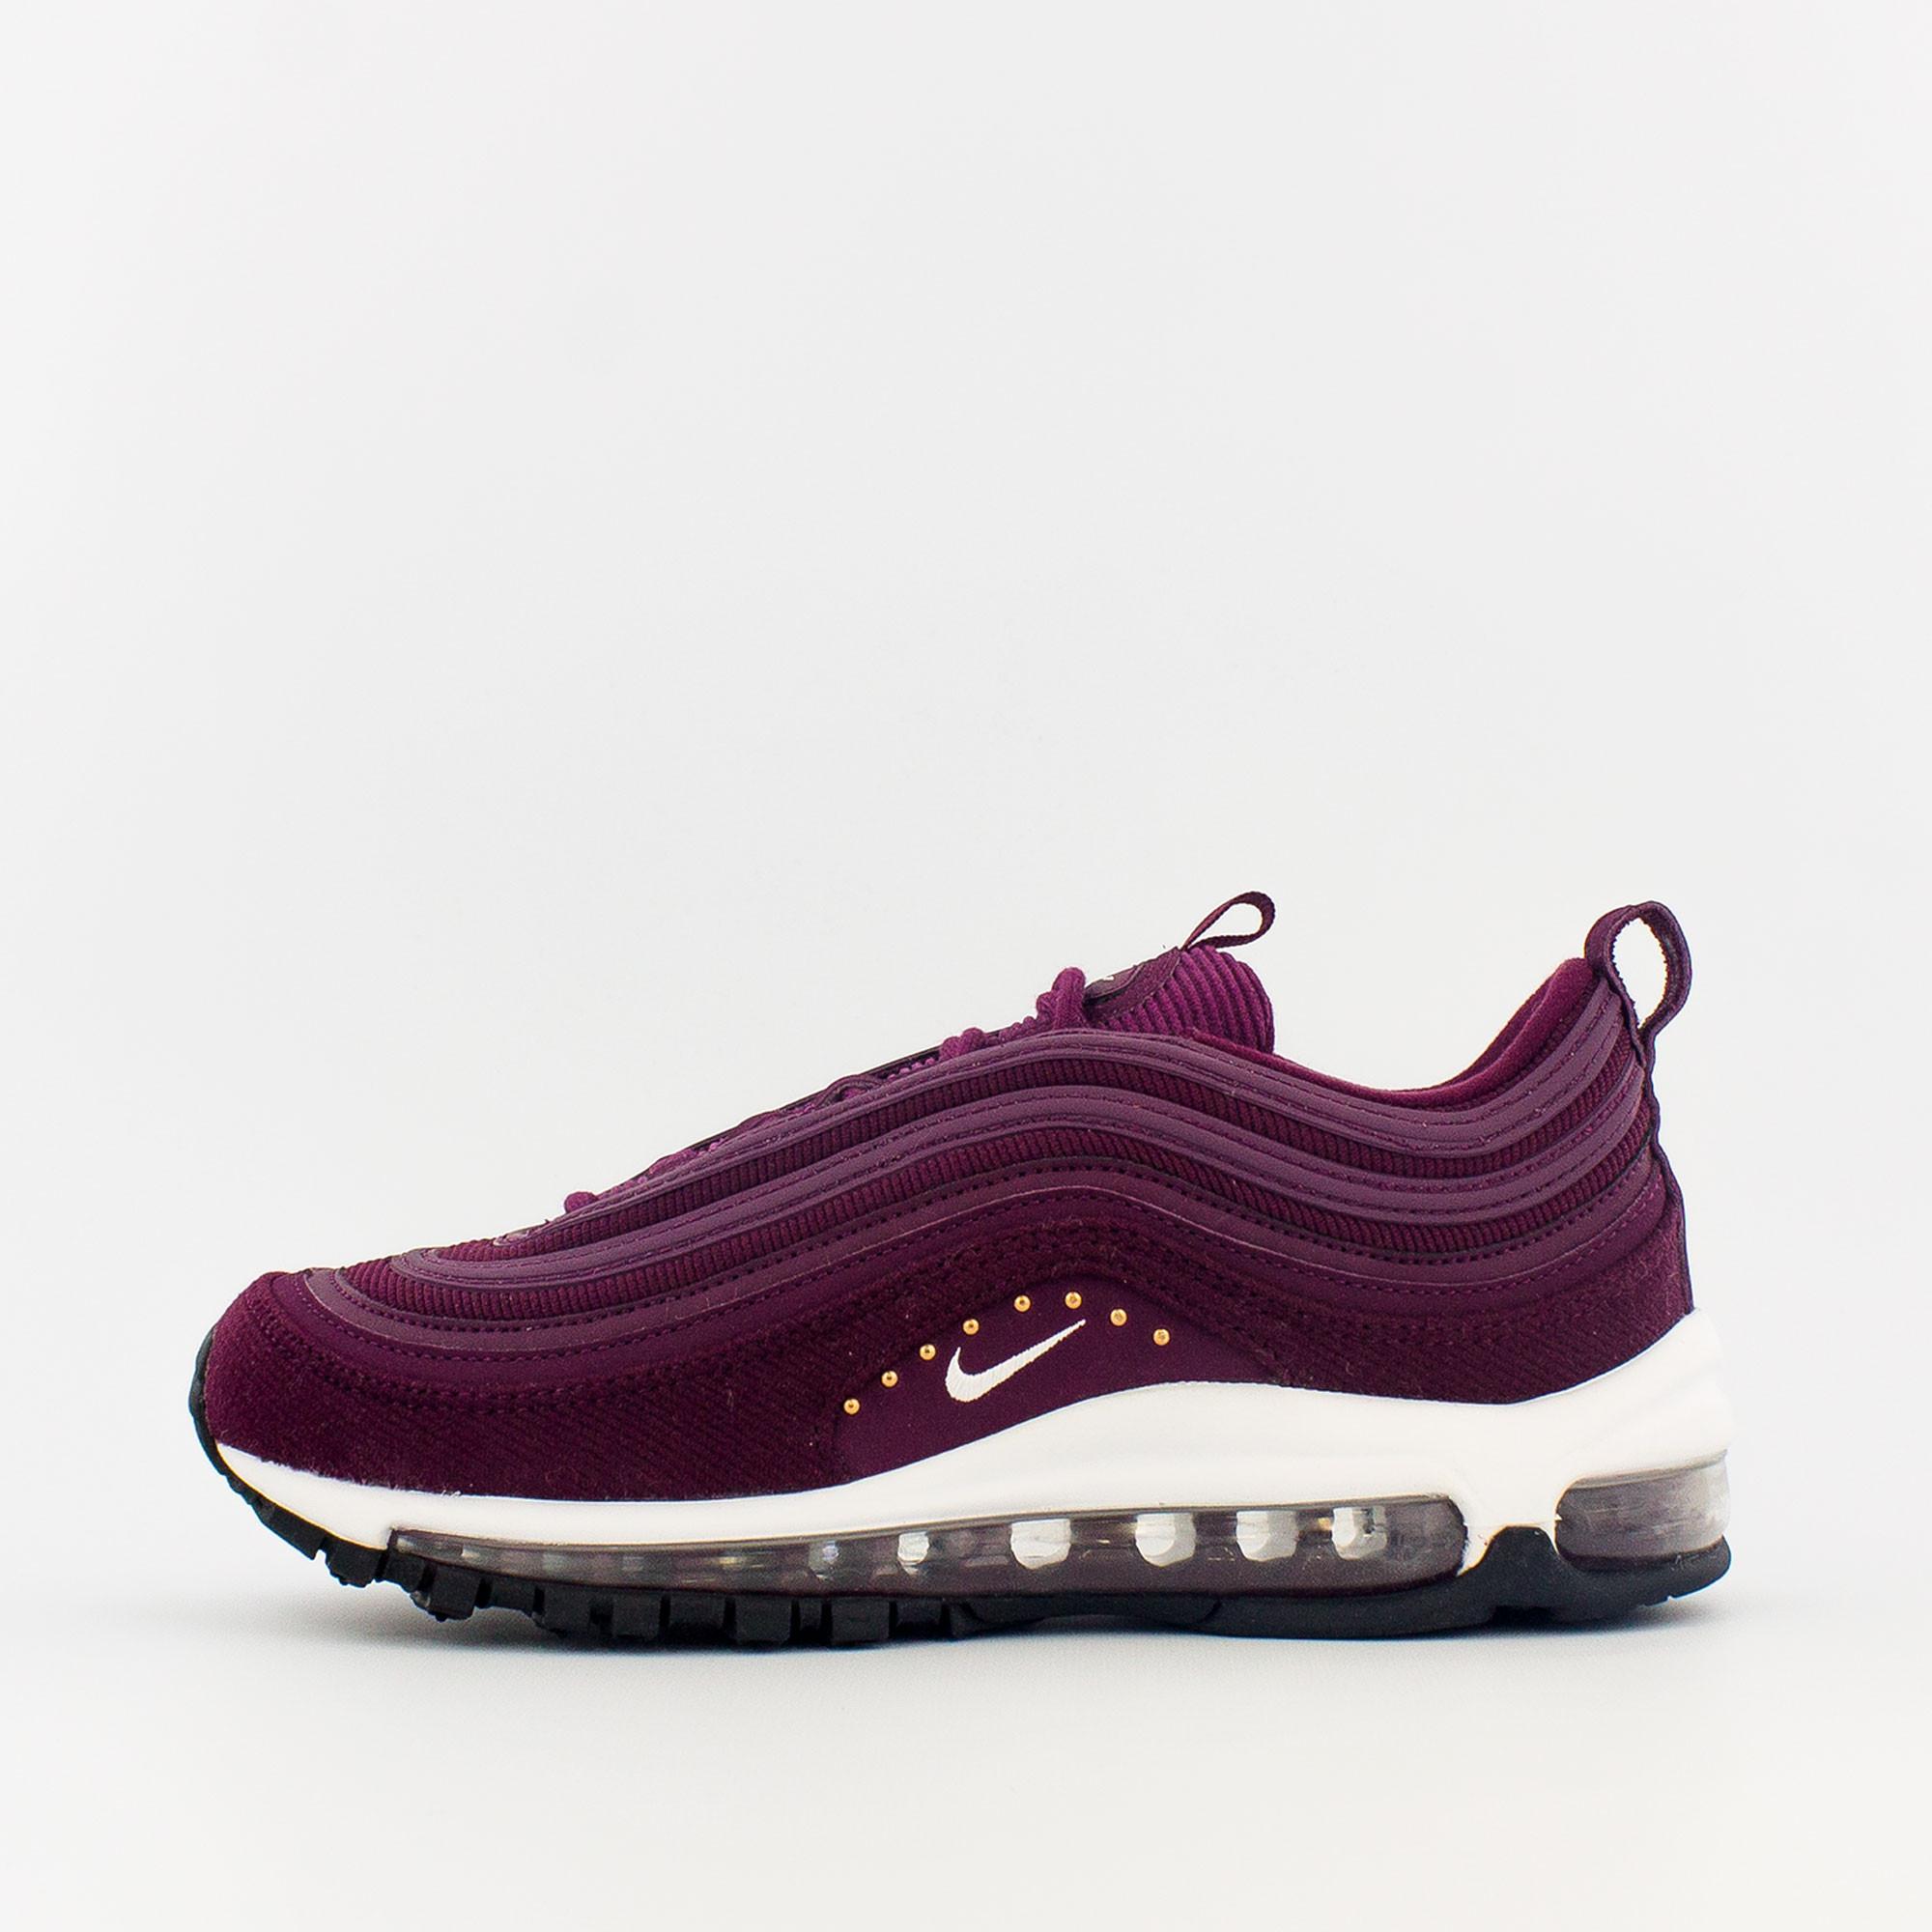 Nike Leather Air Max 97 Se (w) in Bordeaux/White-Black (Purple) - Save 51%  - Lyst